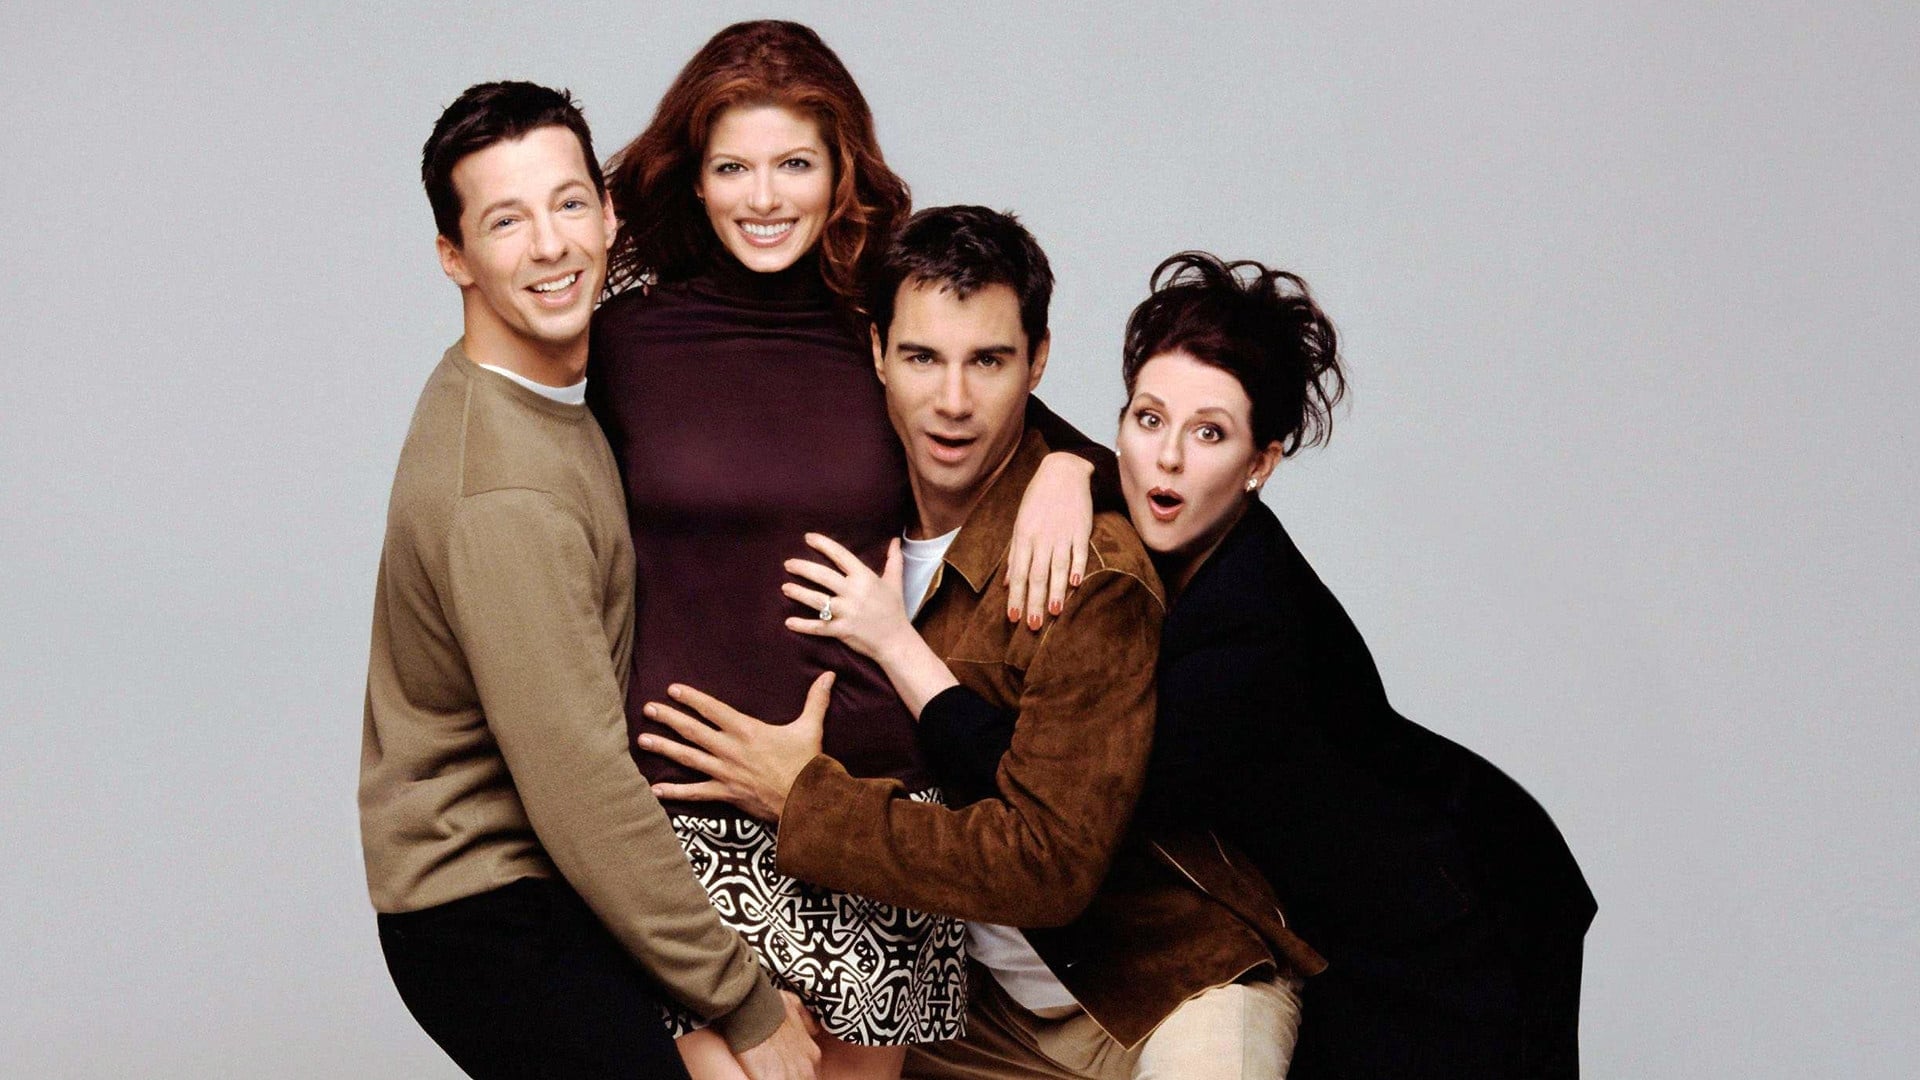 Will & Grace 1998 123movies